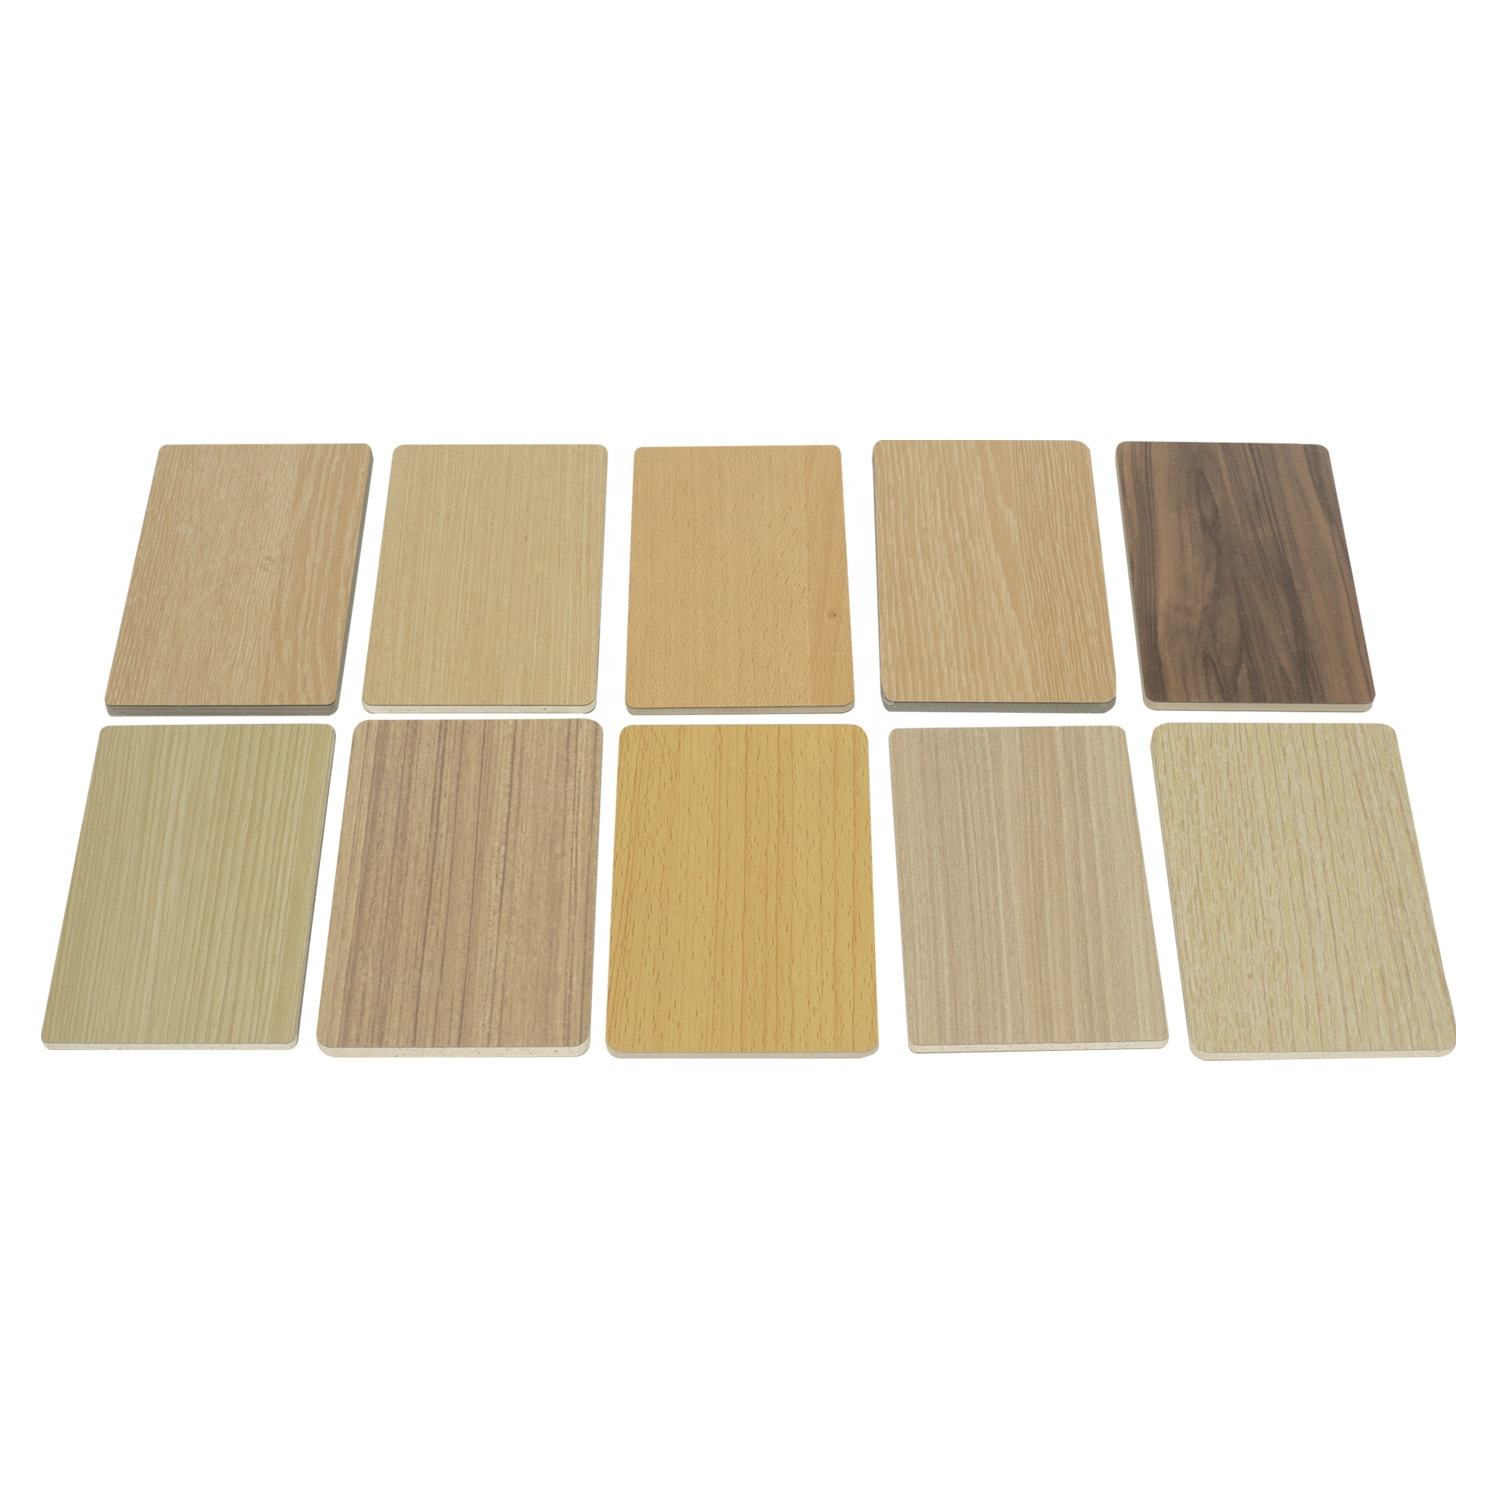 OCM Brand High Pressure Laminate Toilet Partition HPL Compact Board